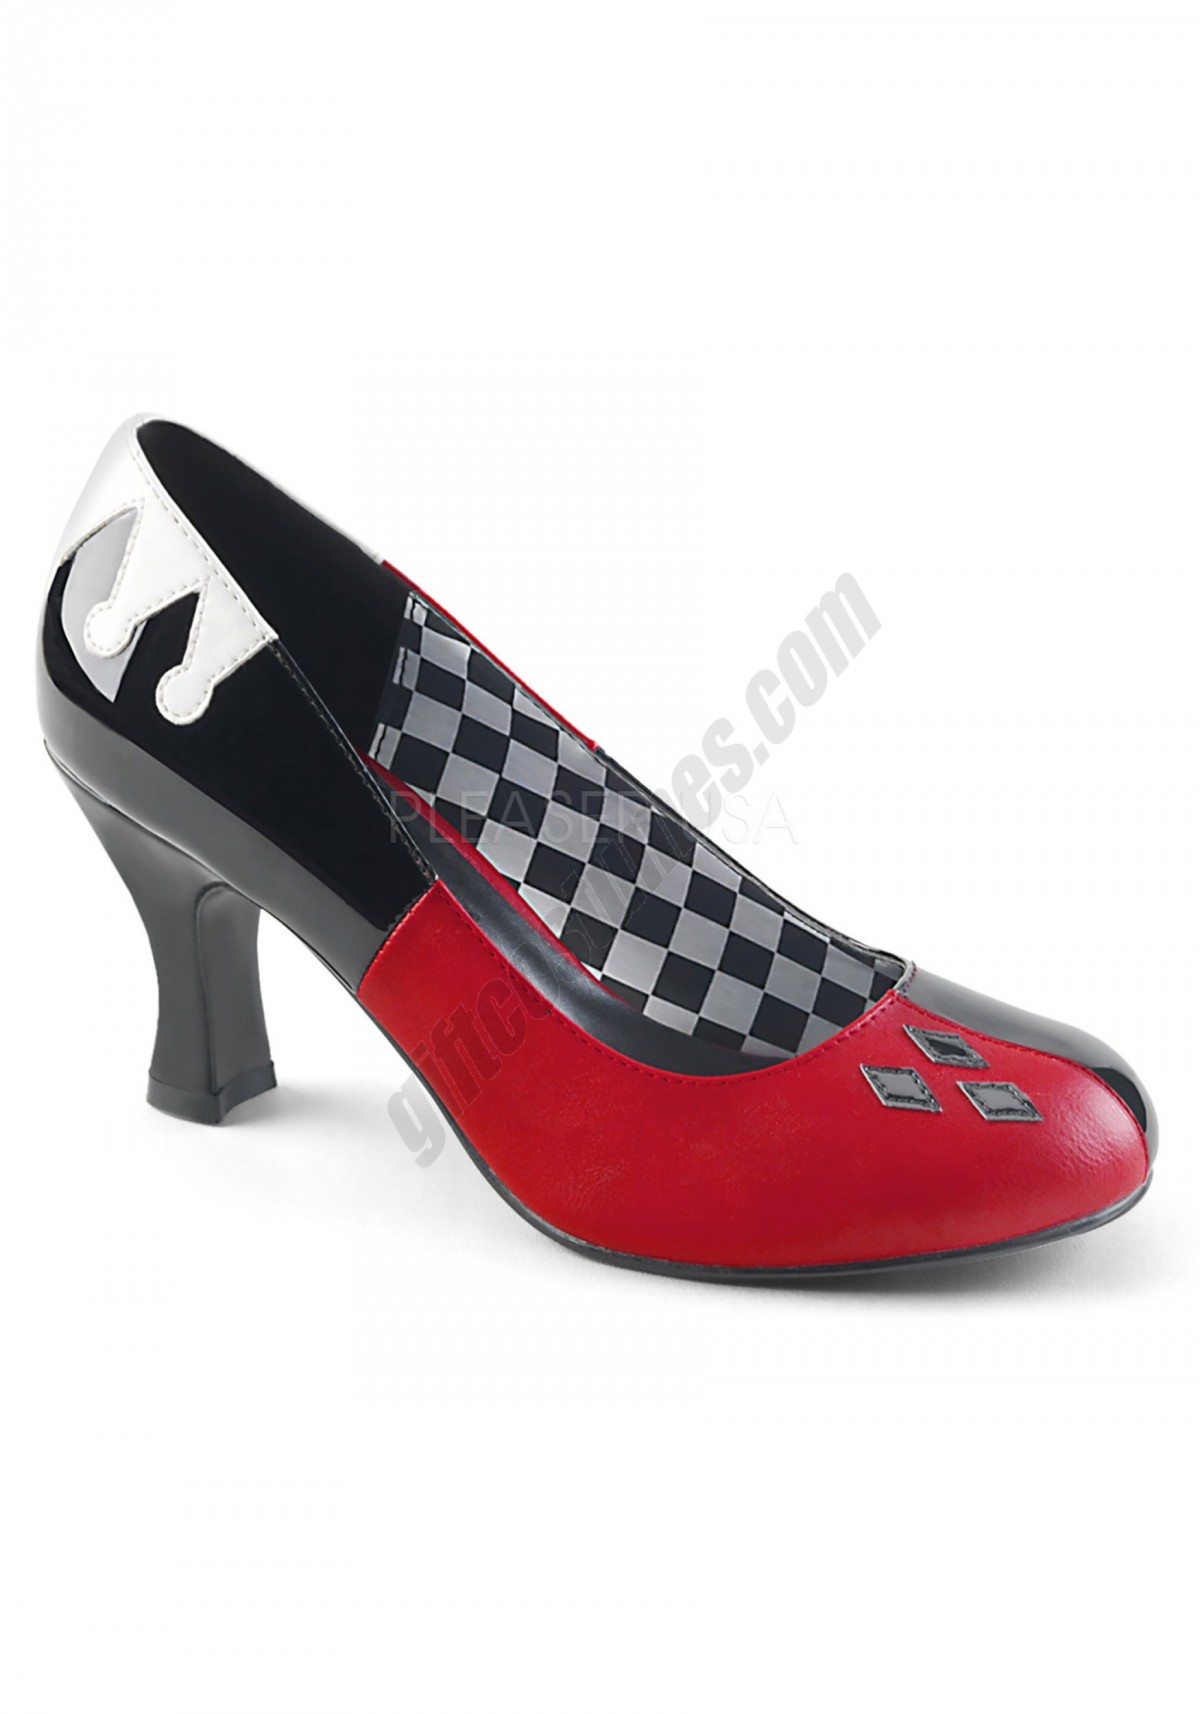 Harley Heels for Women Promotions - -0